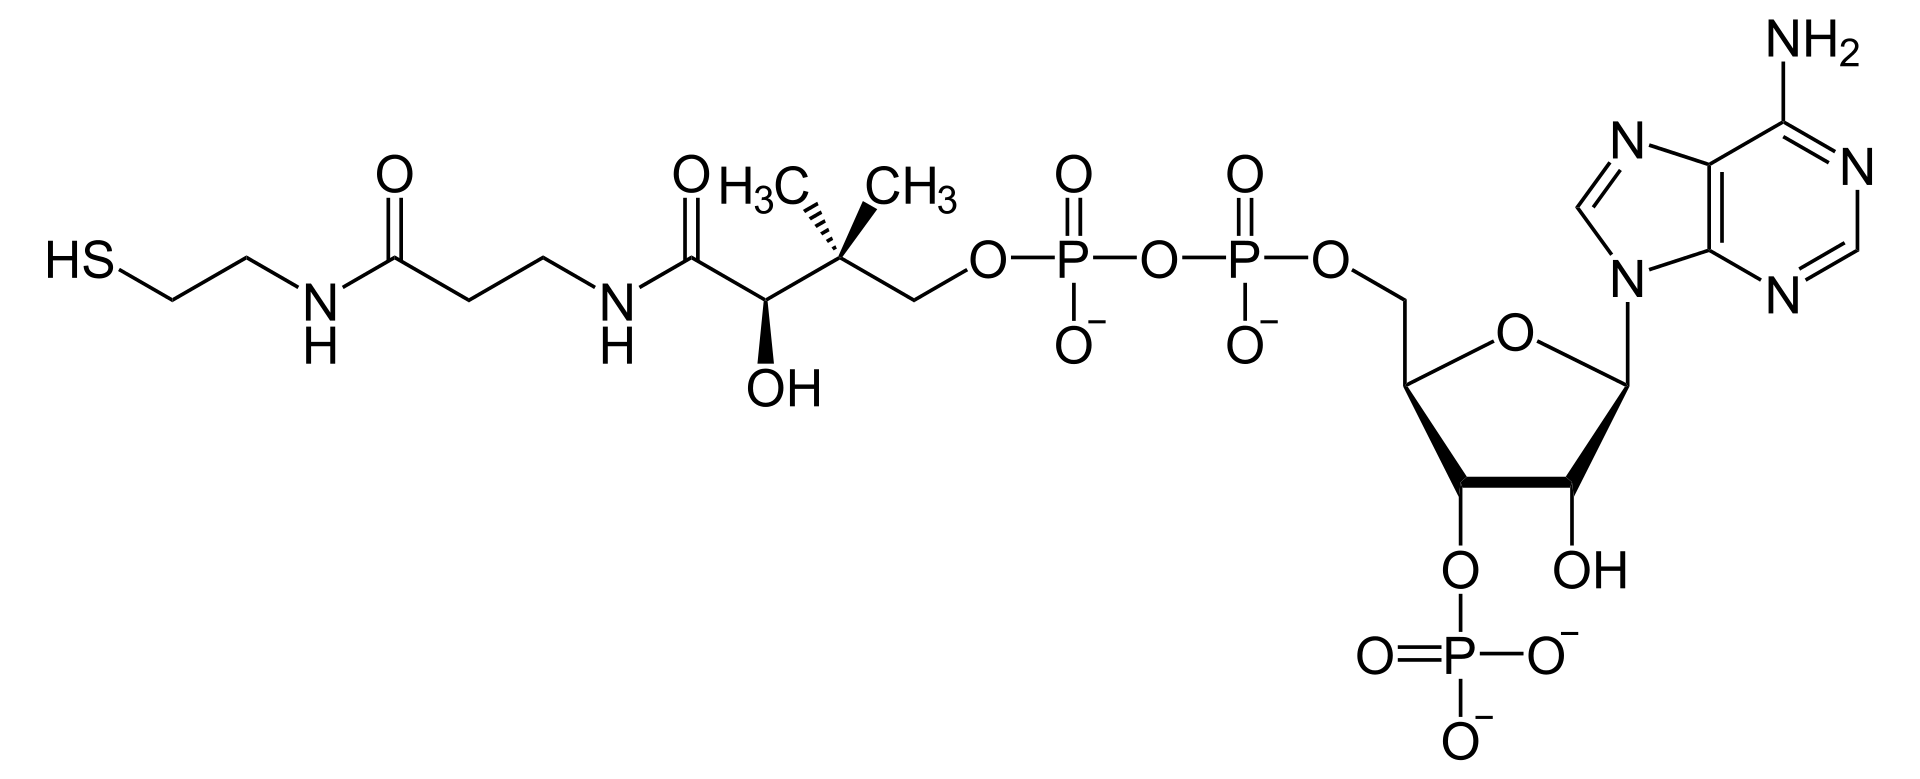 Structure of Coenzyme A